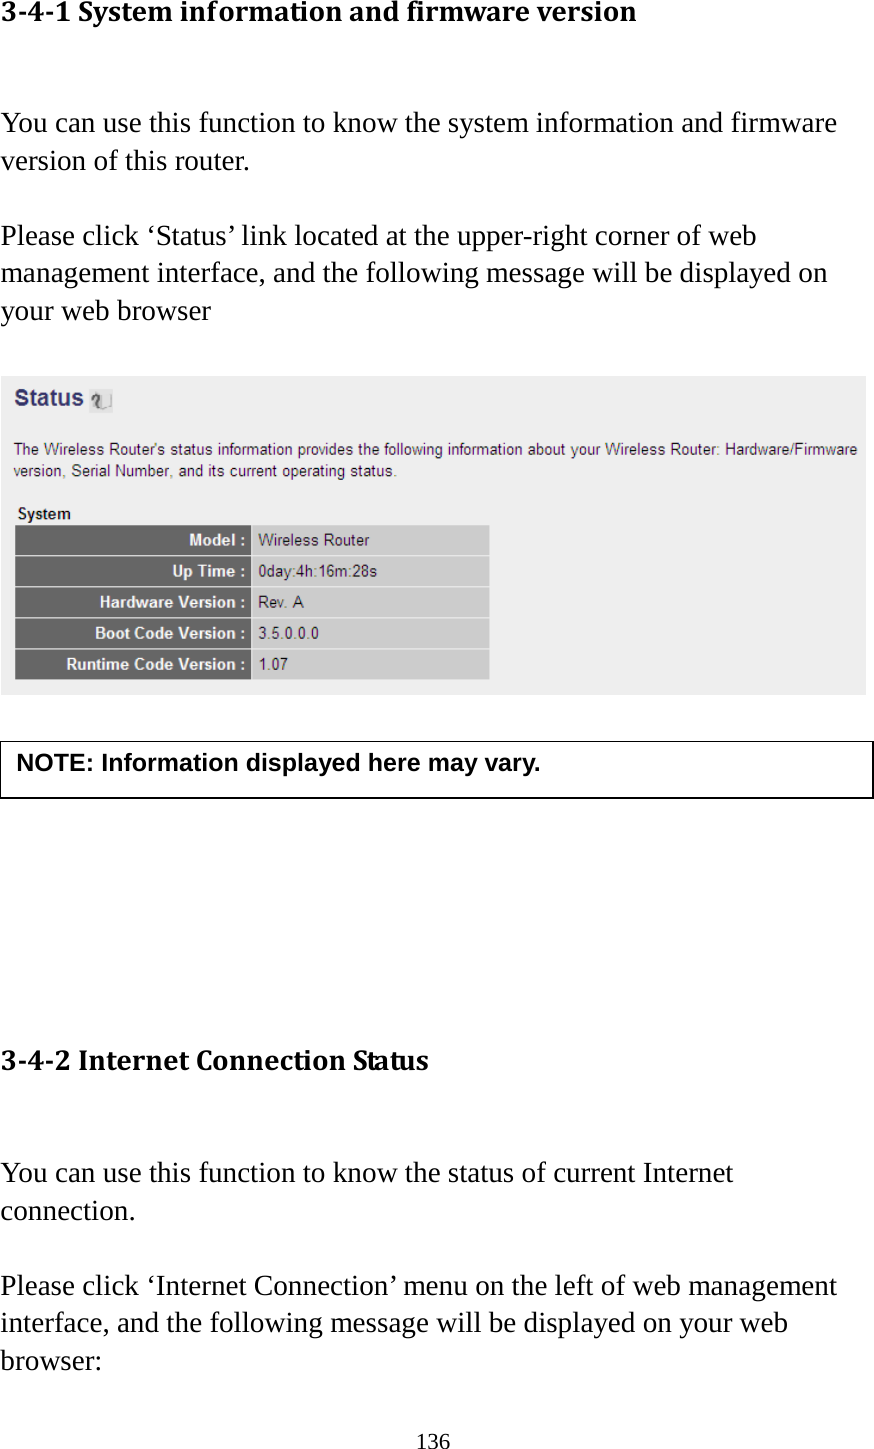 136 3-4-1 System information and firmware version  You can use this function to know the system information and firmware version of this router.  Please click ‘Status’ link located at the upper-right corner of web management interface, and the following message will be displayed on your web browser           3-4-2 Internet Connection Status  You can use this function to know the status of current Internet connection.  Please click ‘Internet Connection’ menu on the left of web management interface, and the following message will be displayed on your web browser: NOTE: Information displayed here may vary. 